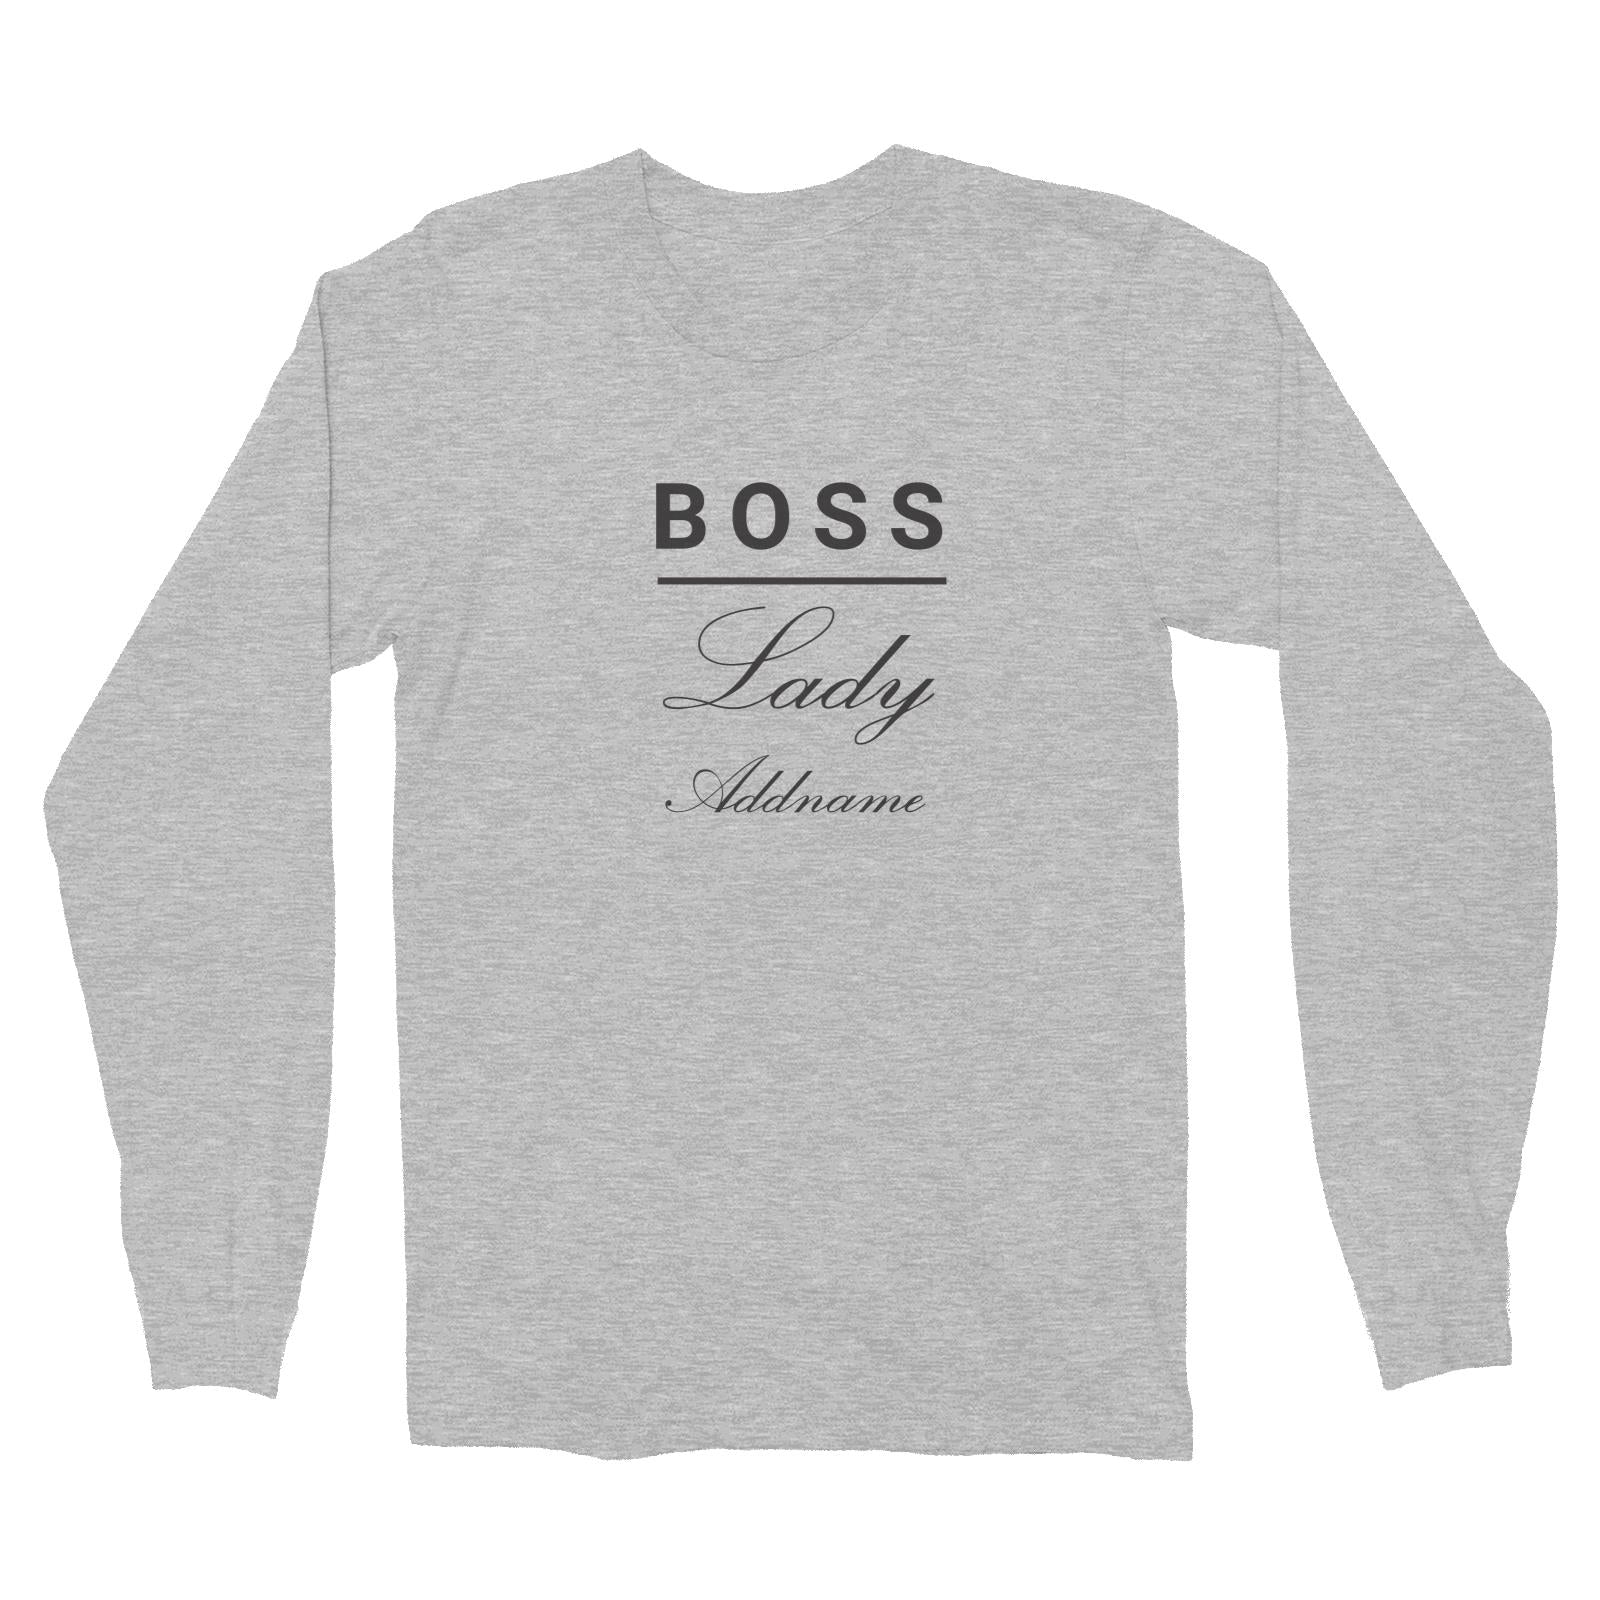 Boss Lady Addname Long Sleeve Unisex T-Shirt  Matching Family Personalizable Designs